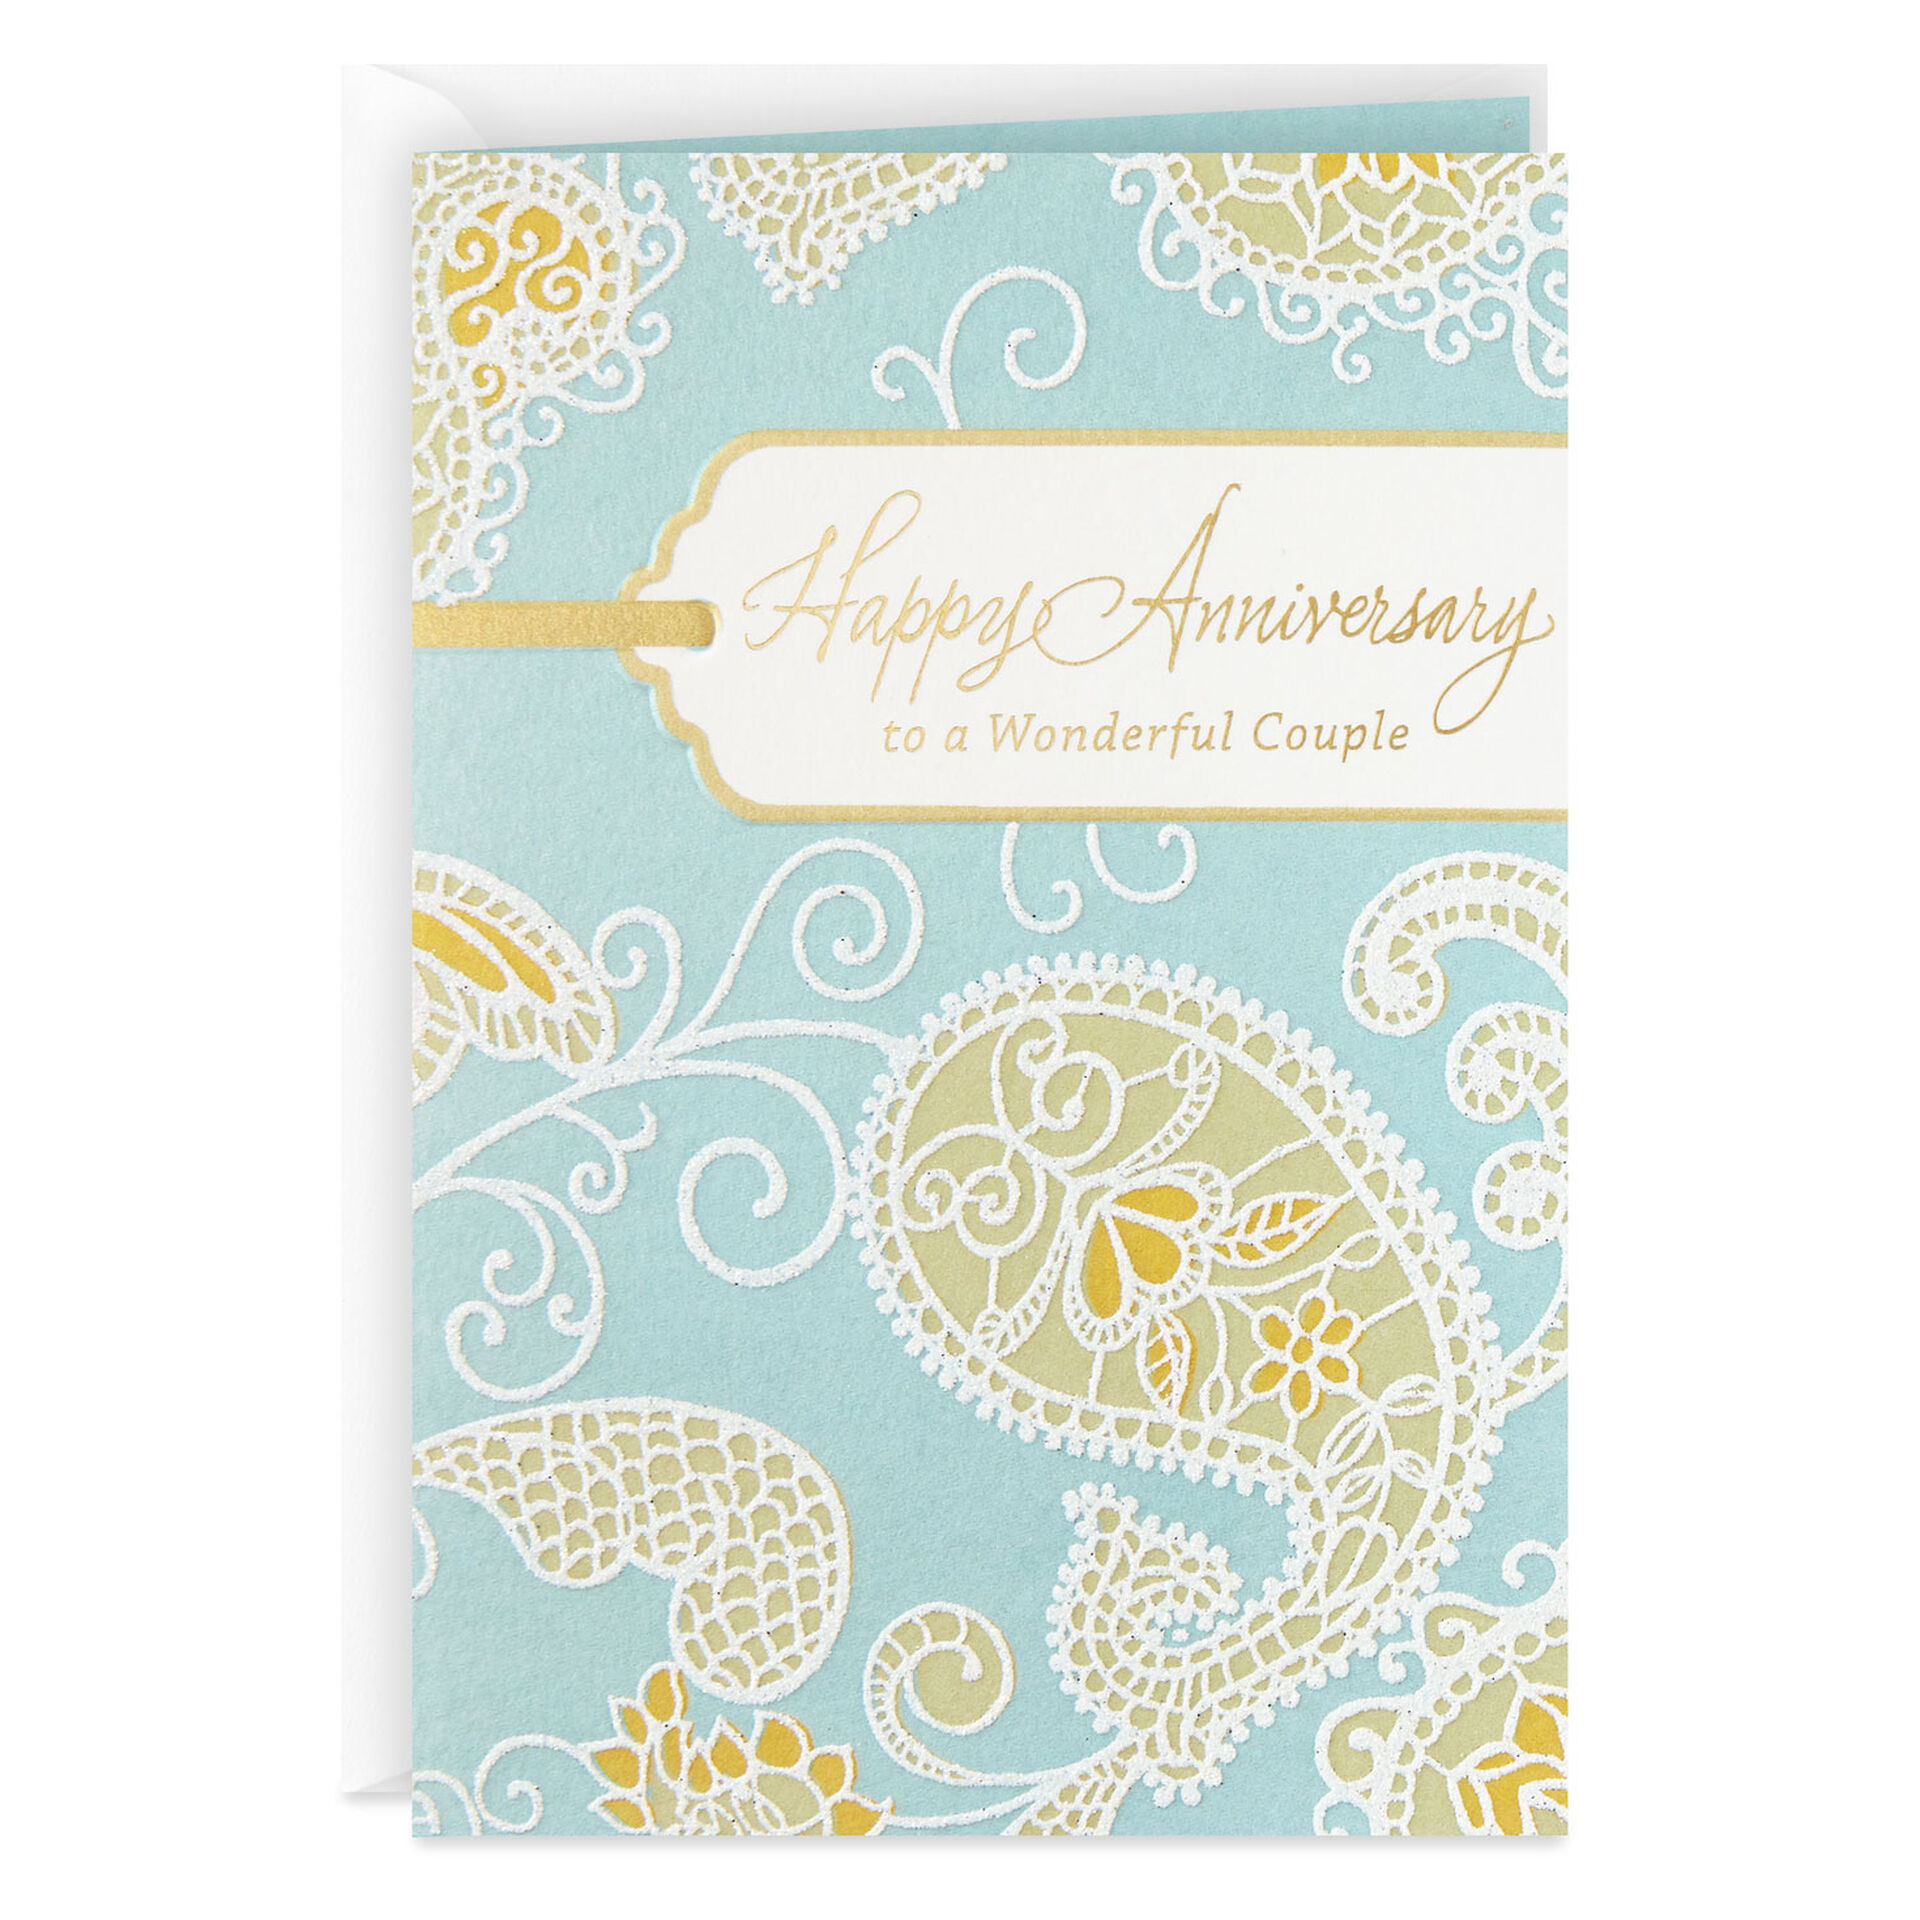 Paisley-Crocheted-Lace-Anniversary-Card-for-Couple_459AVY2943_01